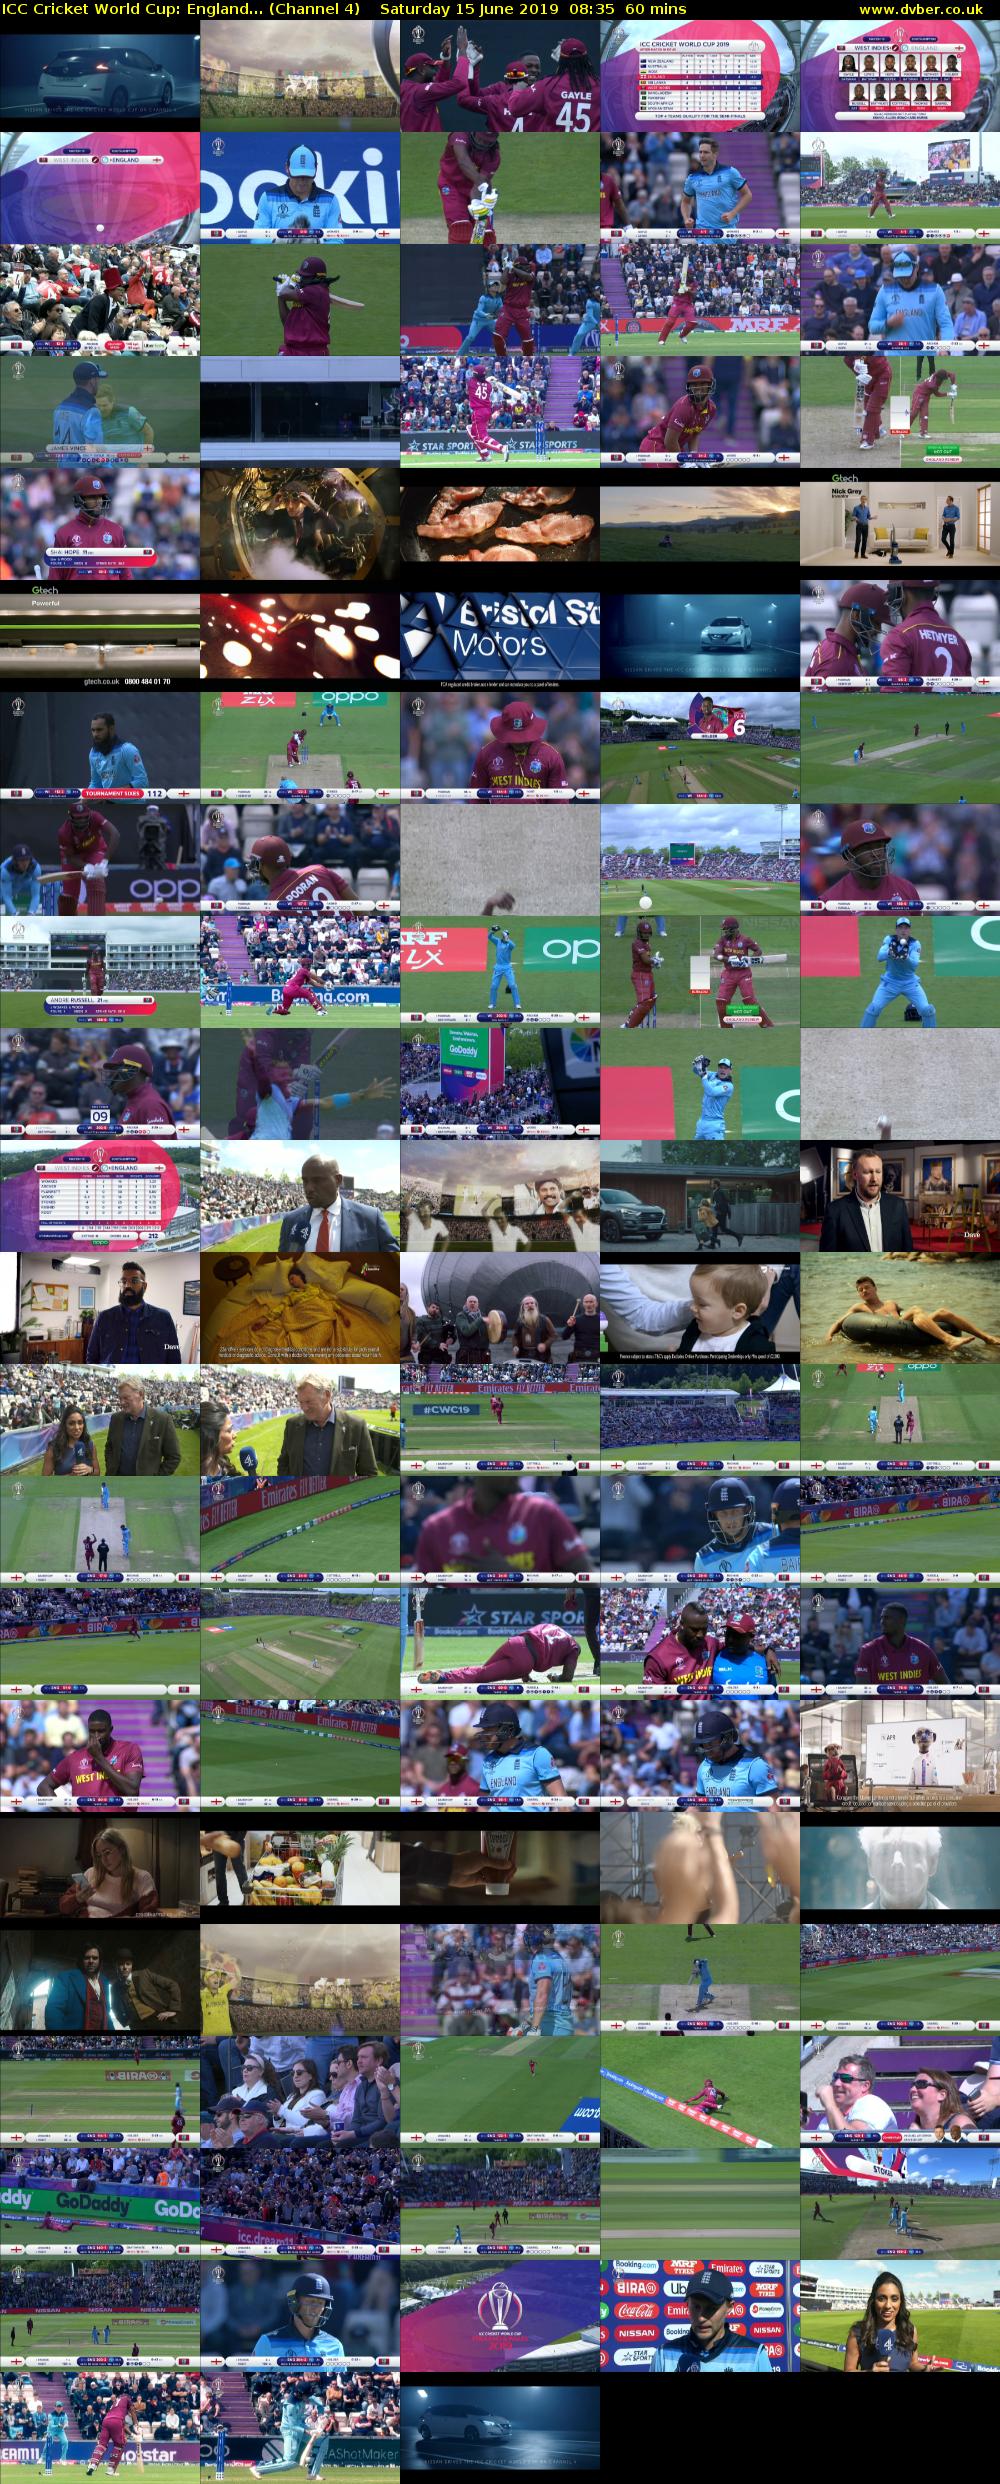 ICC Cricket World Cup: England... (Channel 4) Saturday 15 June 2019 08:35 - 09:35